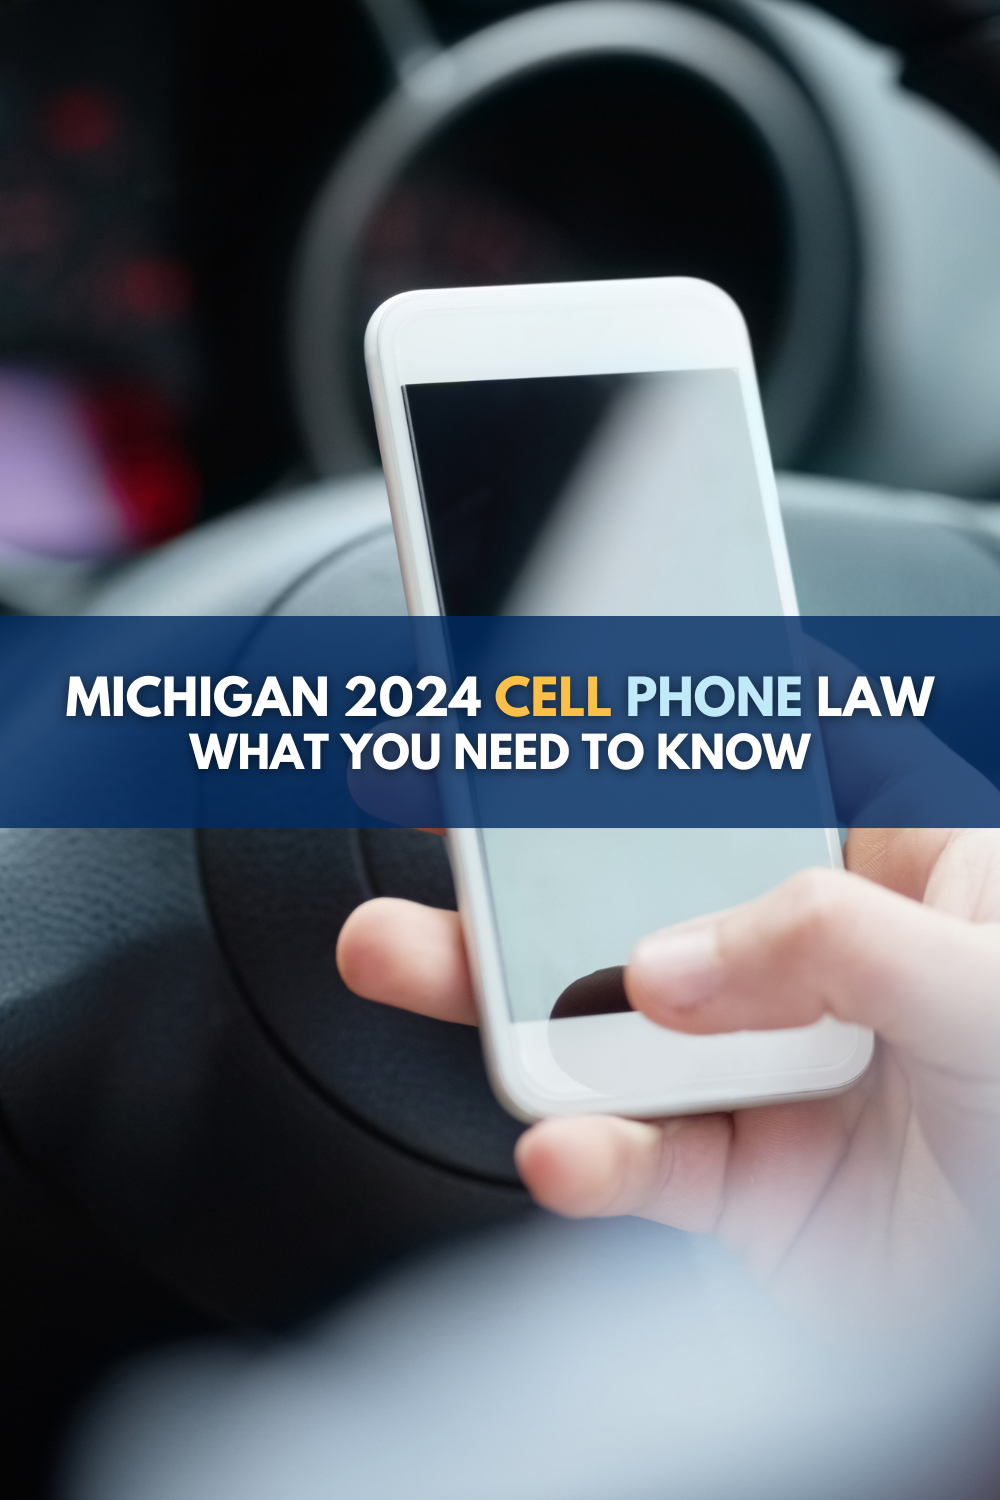 Michigan Cell Phone Law 2024: What You Need To Know